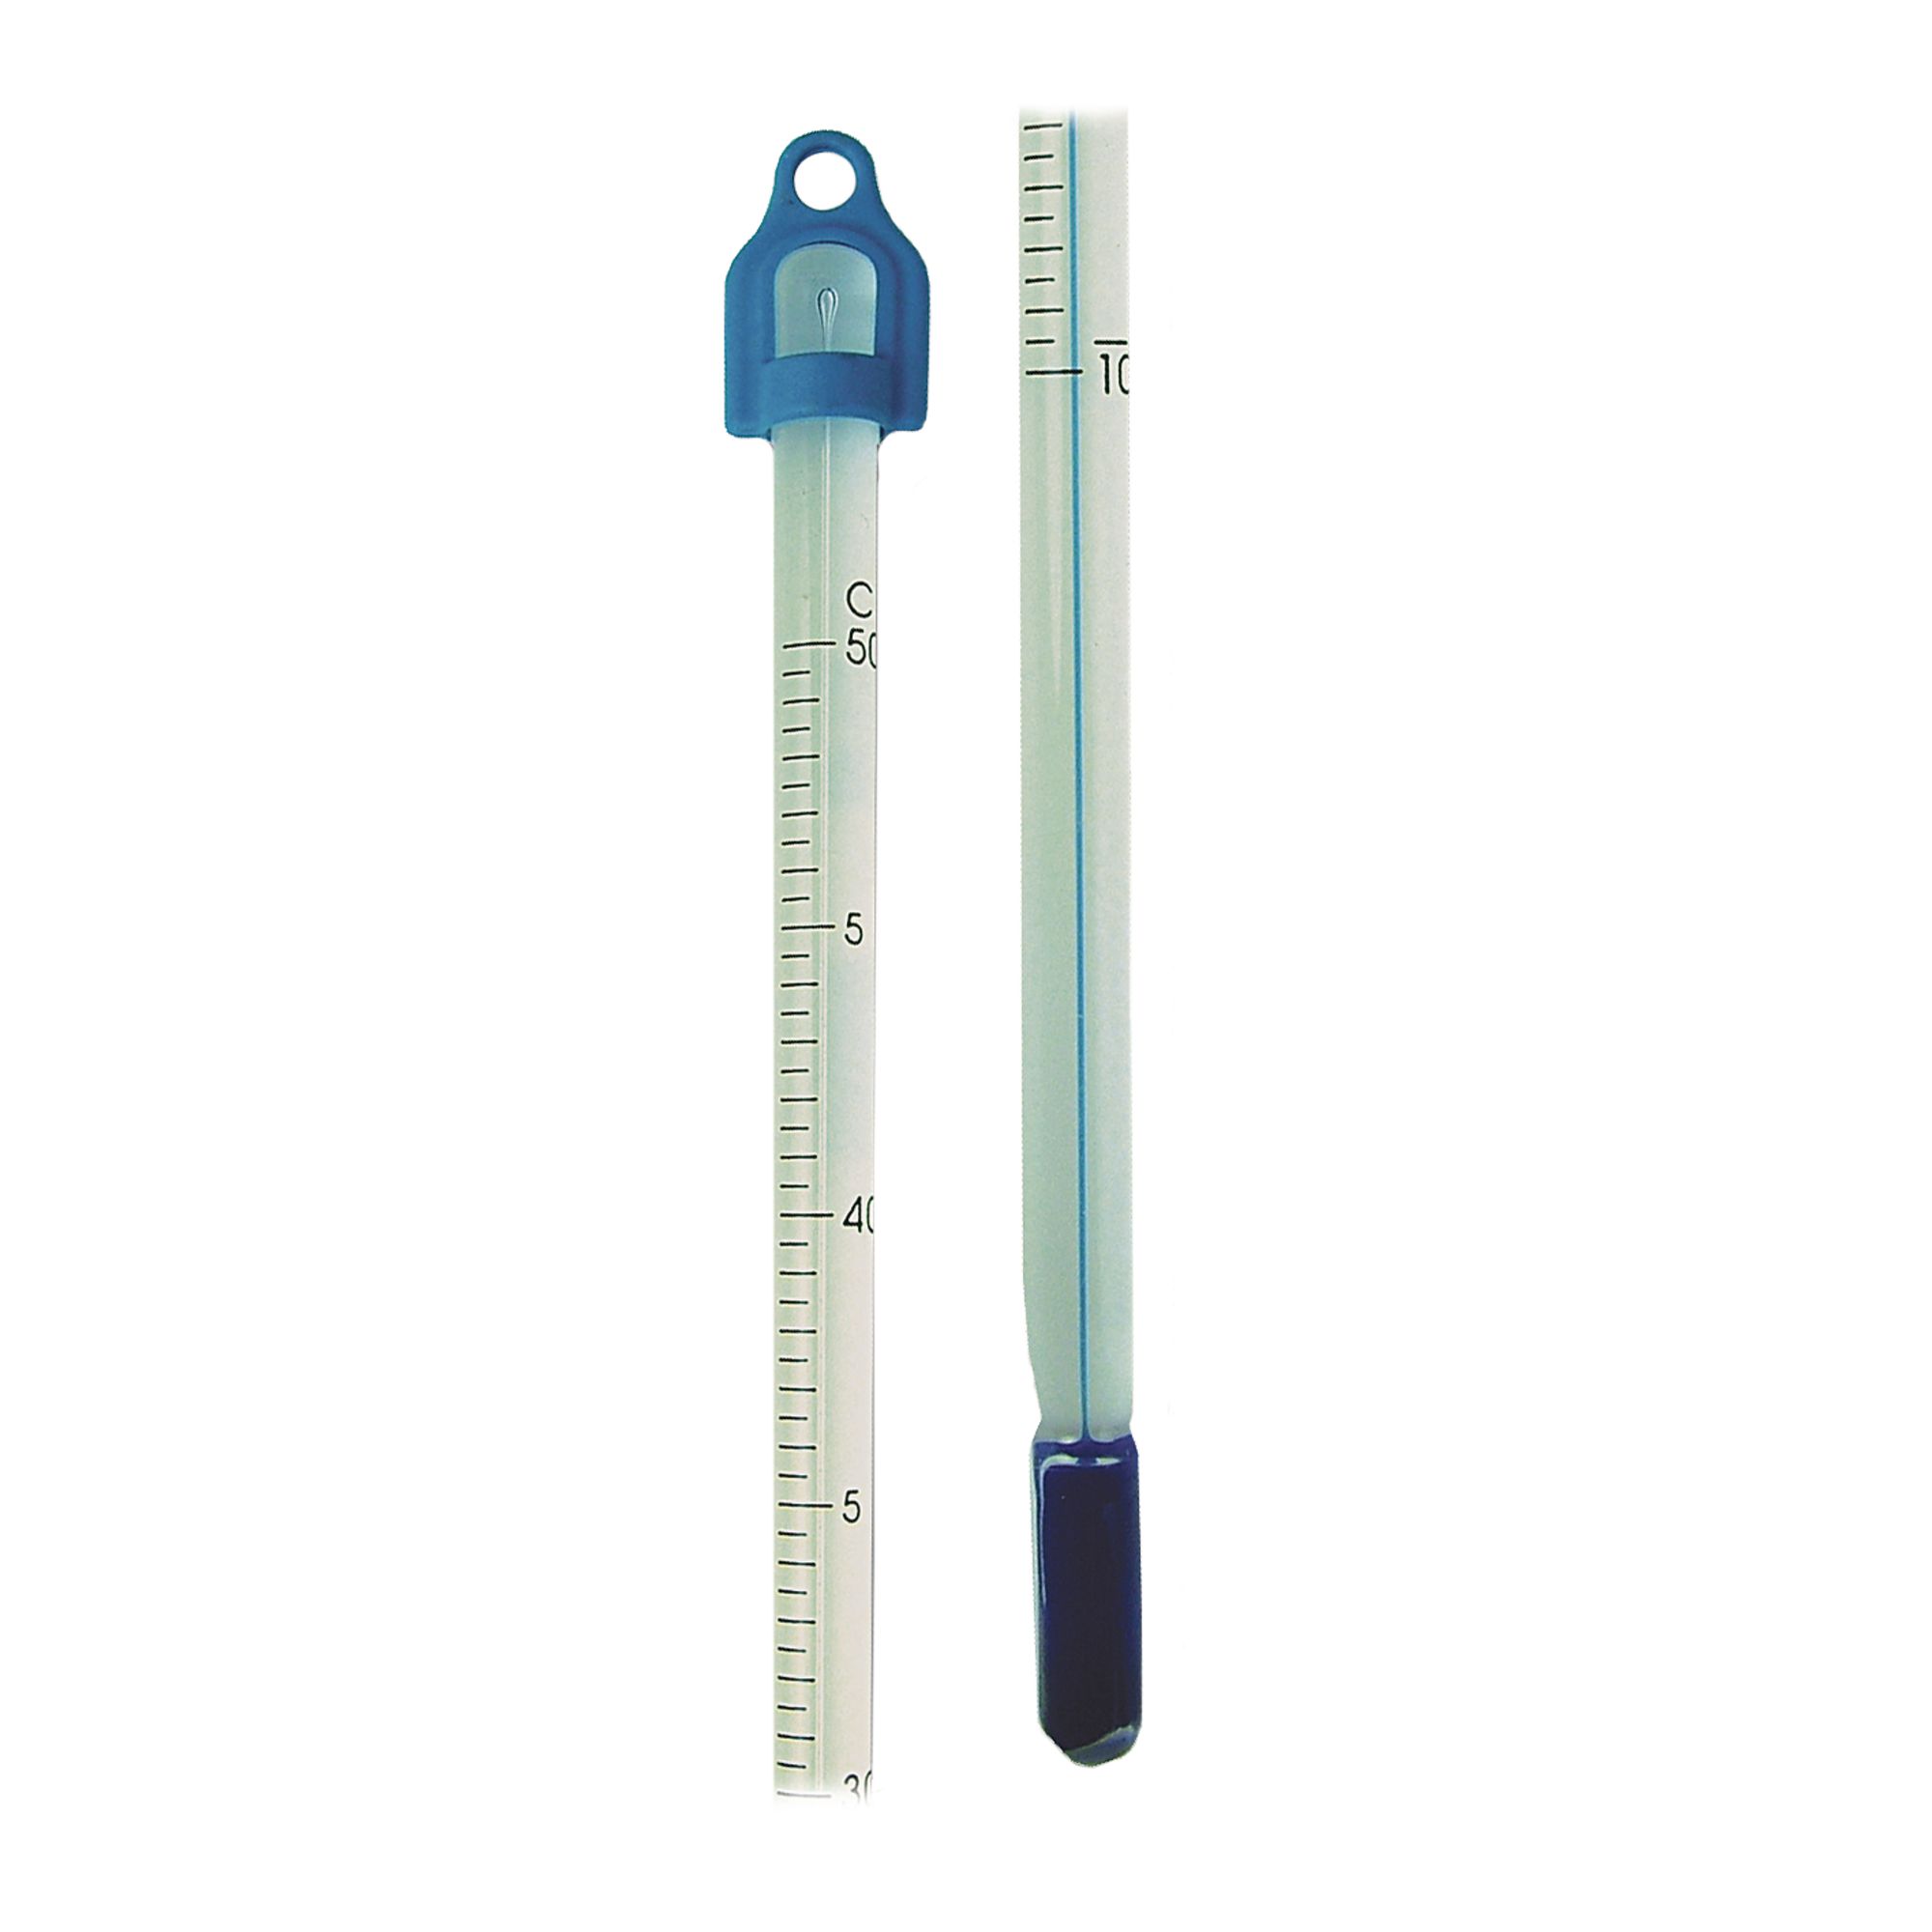 Lo-tox -10 To 210c Thermometer